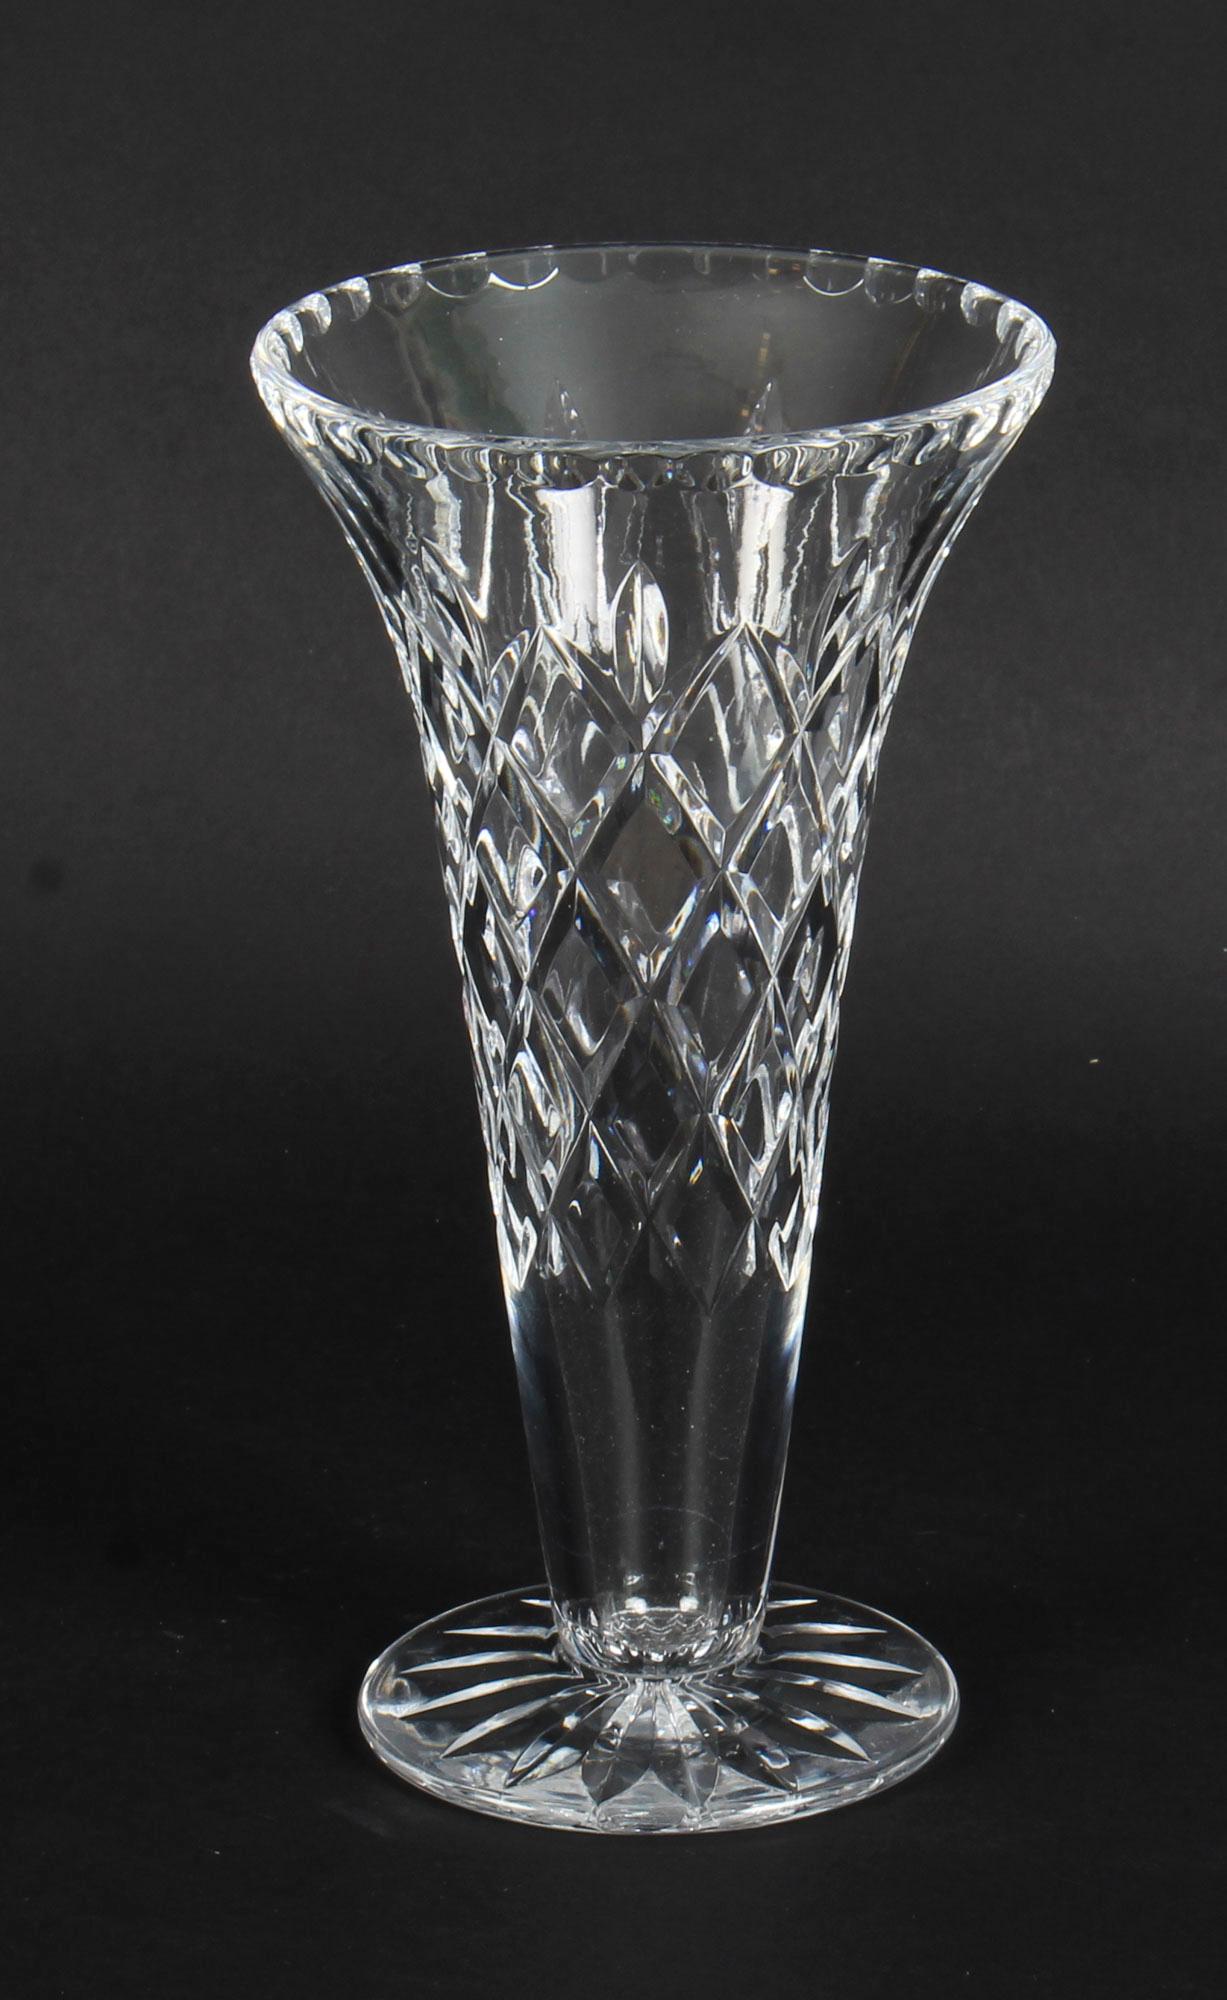 This is a splendid  antique Waterford cut crystal vase, circa 1900 in date.
 
This wonderful vase has a delightful sloping neck which is ideal for almost any floral arrangement, while the vase itself boasts stability and comforting weight. It